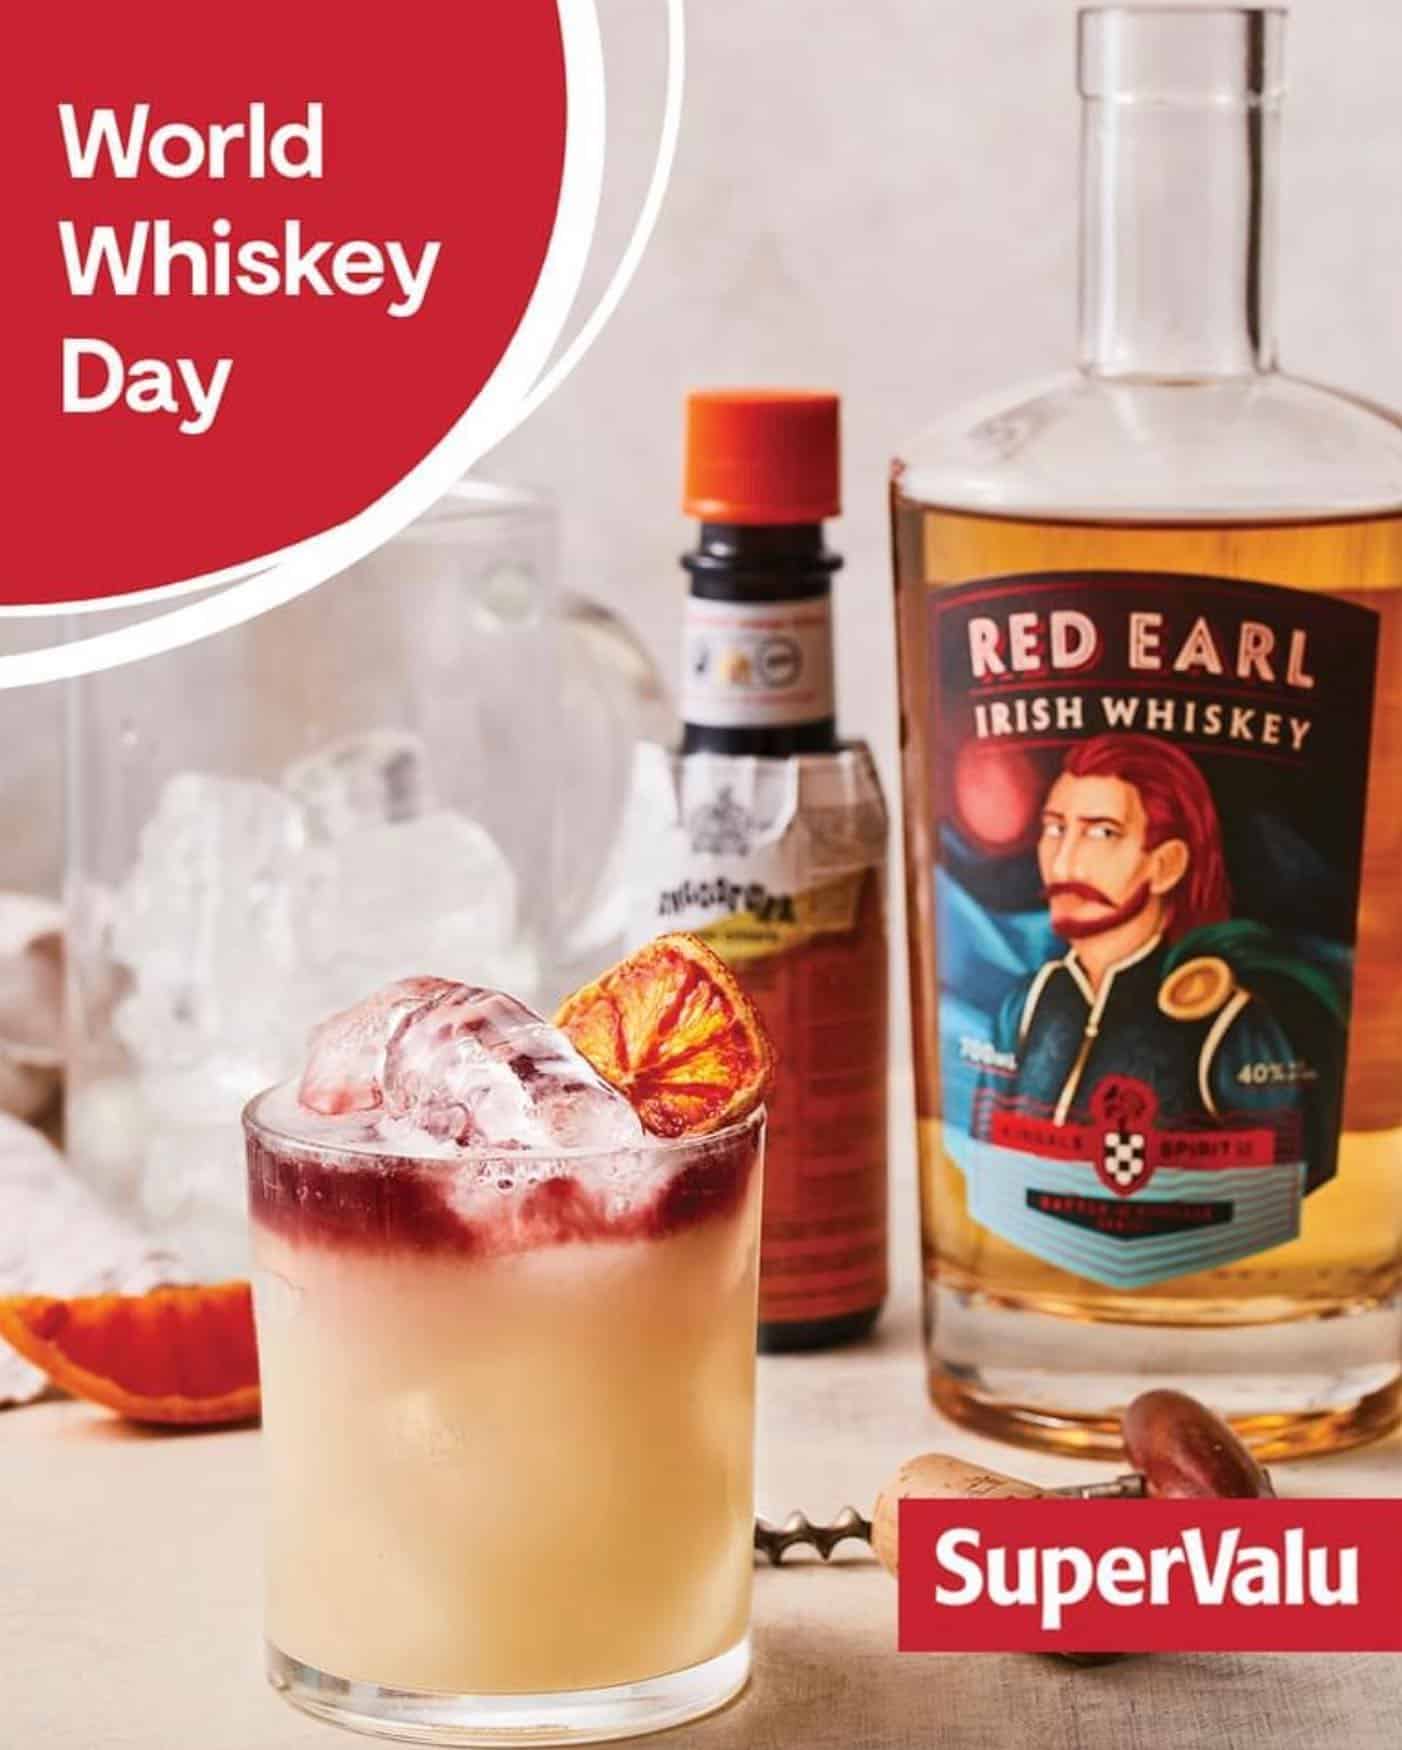 🥃 WORLD WHISKEY DAY 🥃

Celebrate World Whiskey Day 21st May with @supervalu_irl New York Sour using our Red Earl Irish Whiskey.

View the recipe here: https://bit.ly/3PABROE

Over 18s only. Please drink sensibly.

#worldwhiskeyday #redearlwhiskey 
#irishwhiskey #whiskey #whisky #cocktails